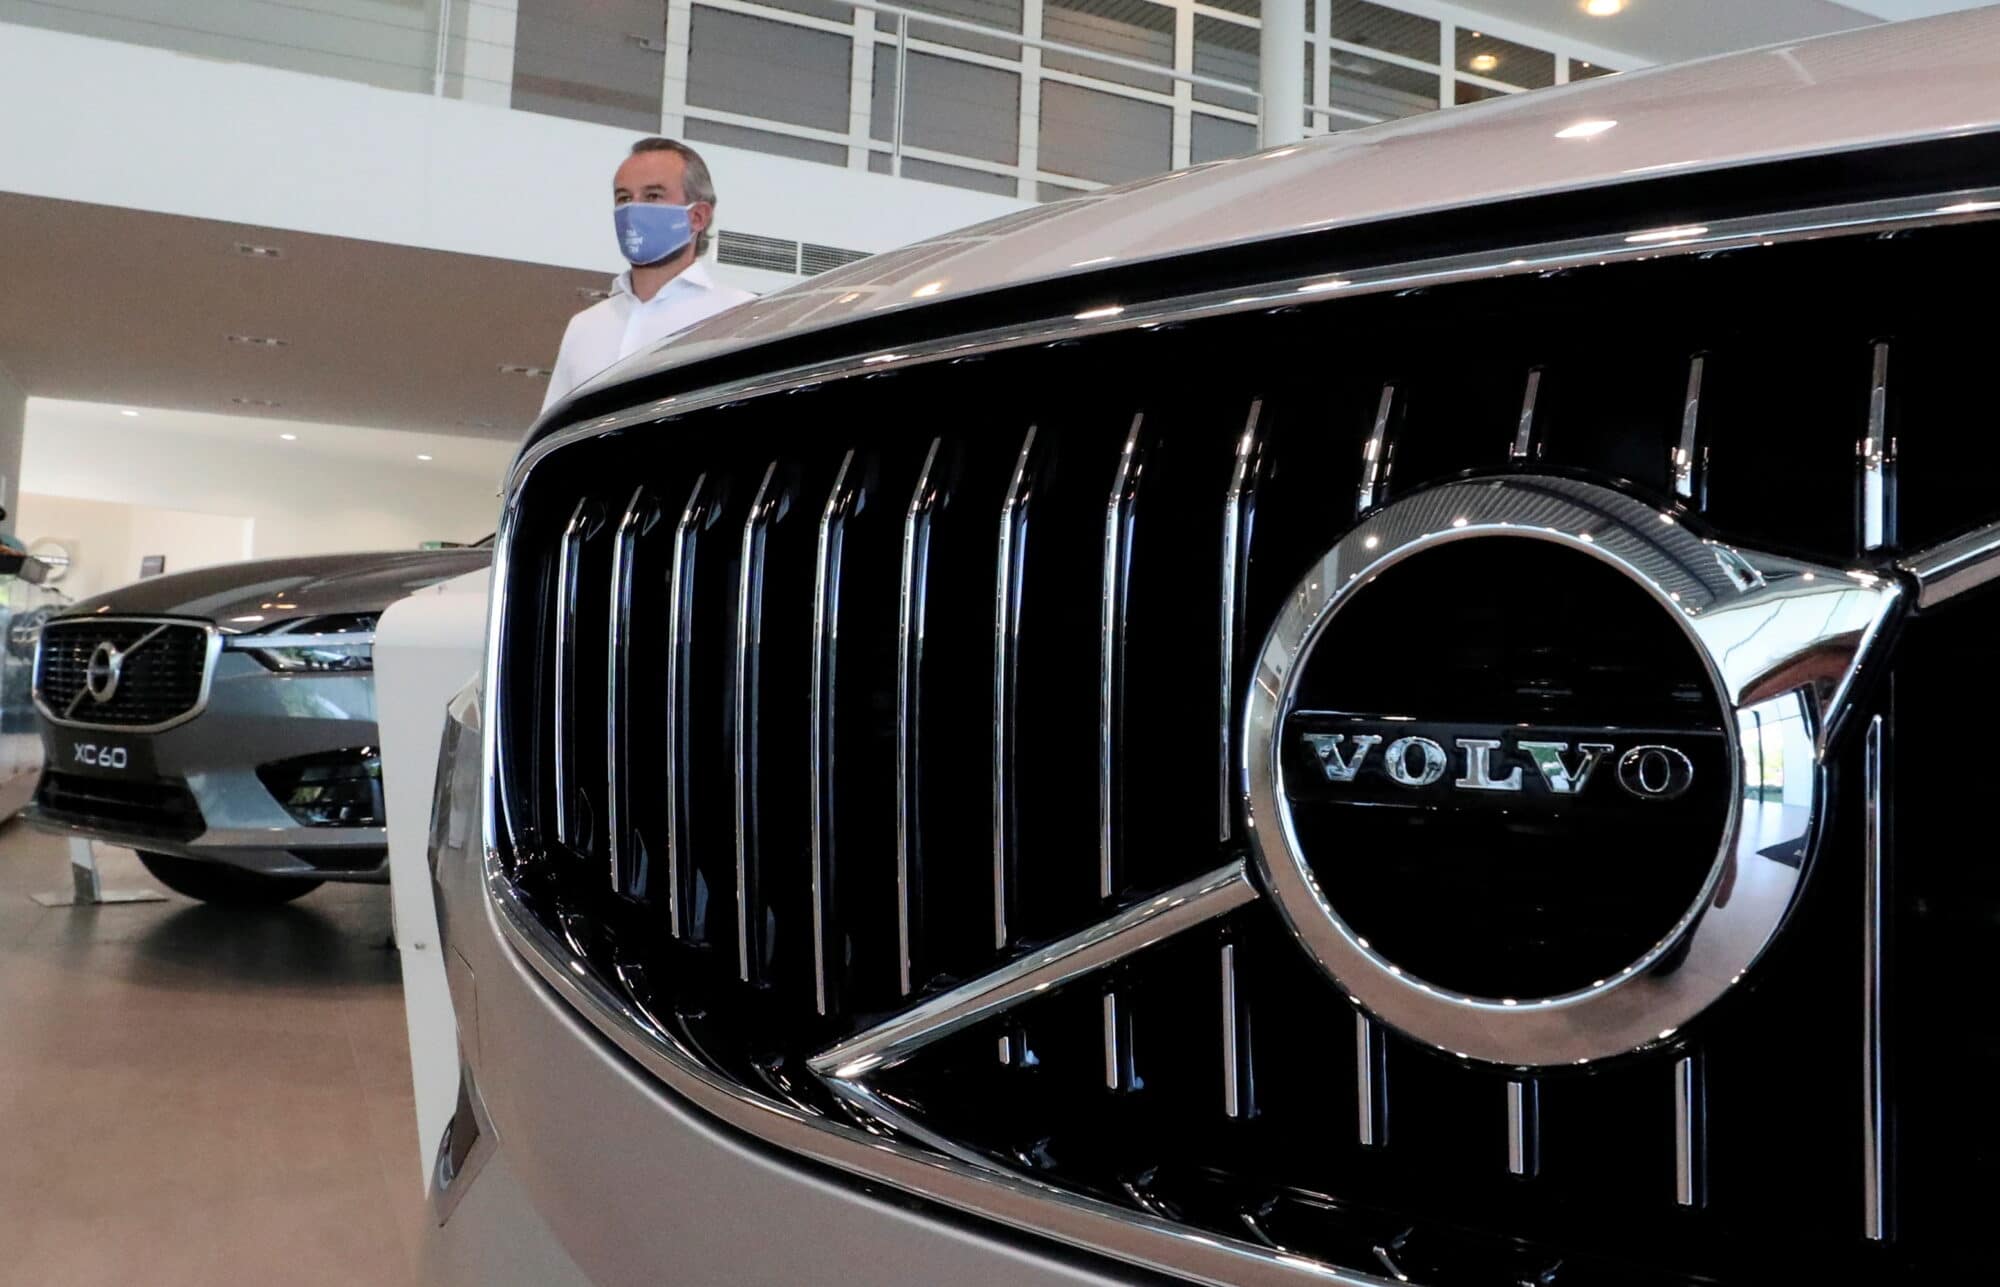 Geely’s Volvo cars, Geely’s Volvo cars filing for IPO, Startup World Tech